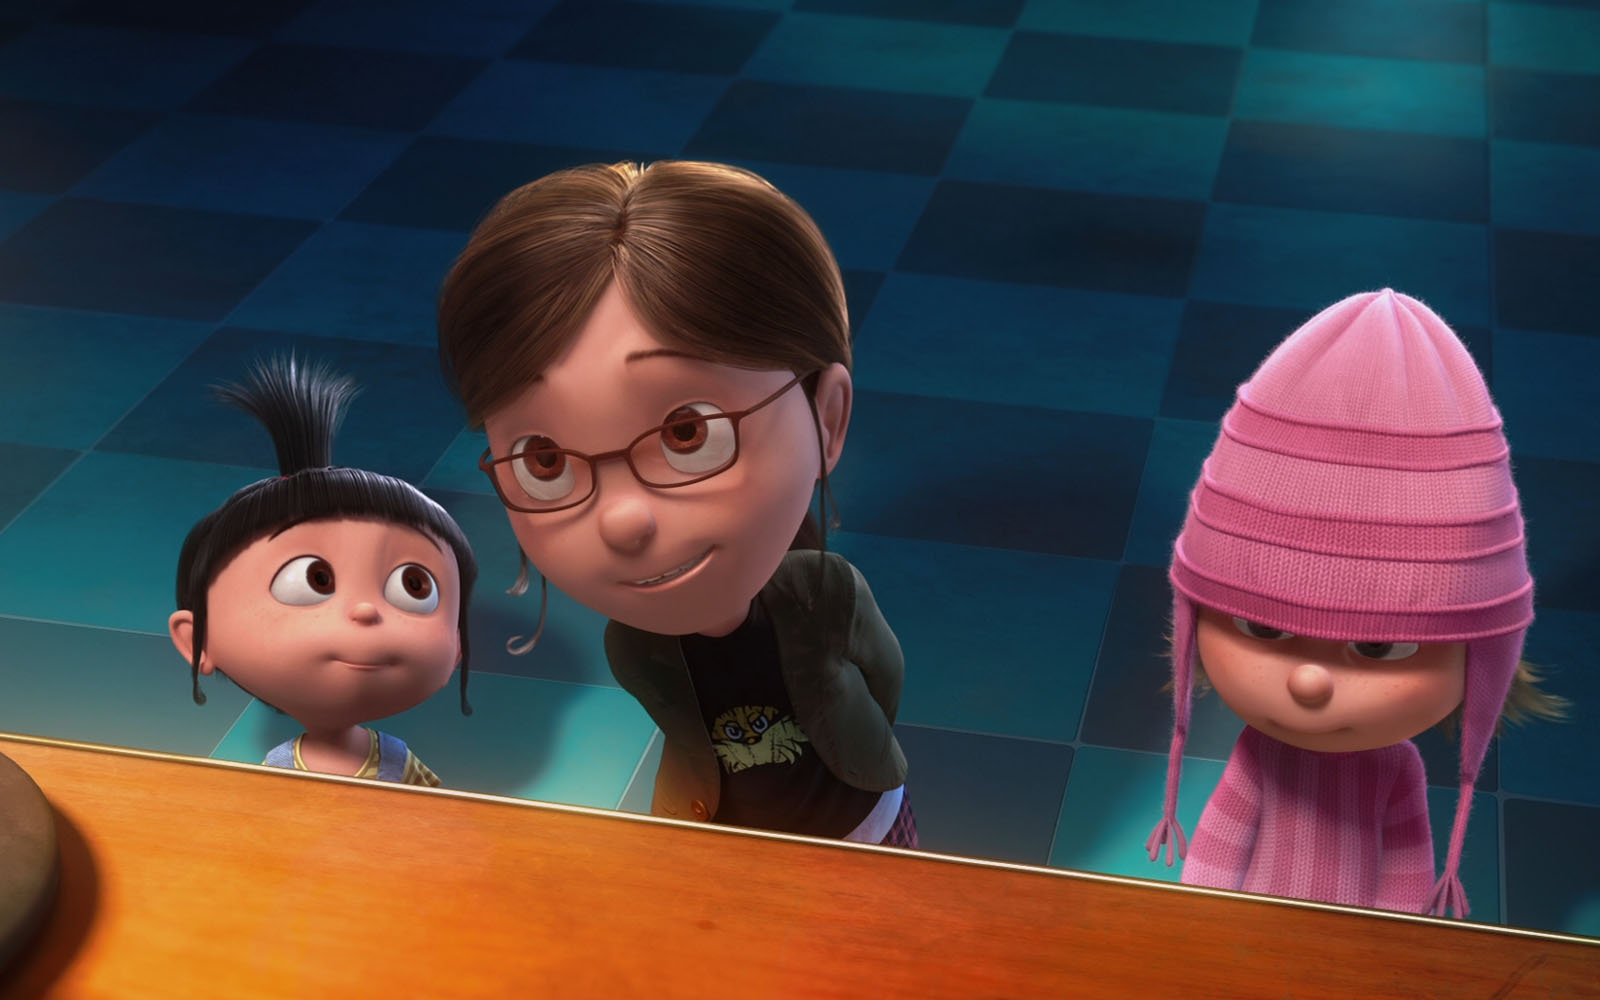 Tag Despicable Me Wallpaper Image Photos And Pictures For